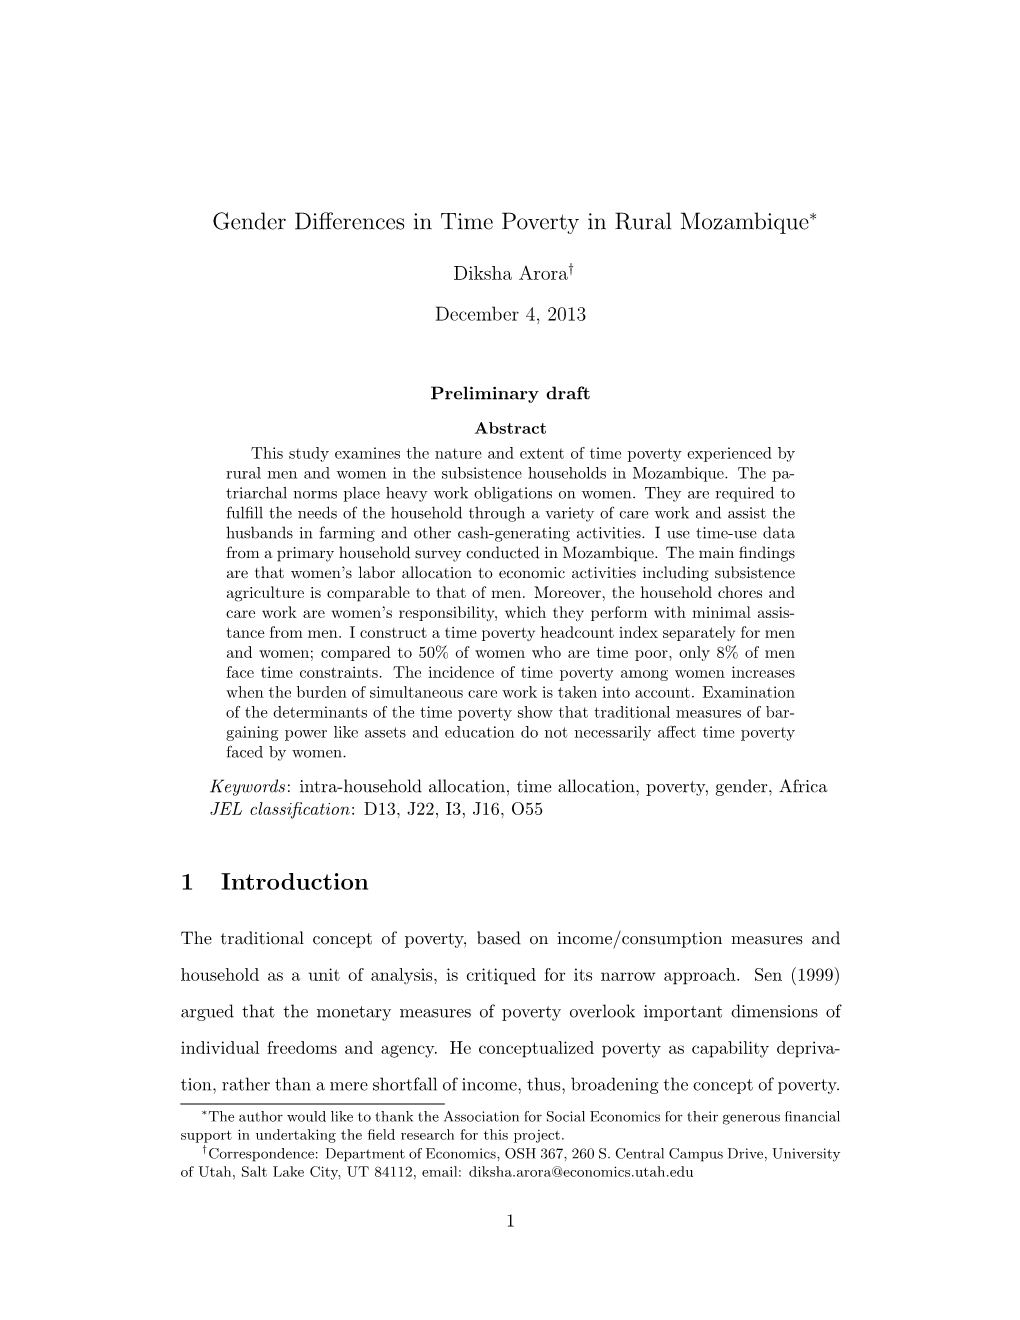 Gender Differences in Time Poverty in Rural Mozambique 1 Introduction